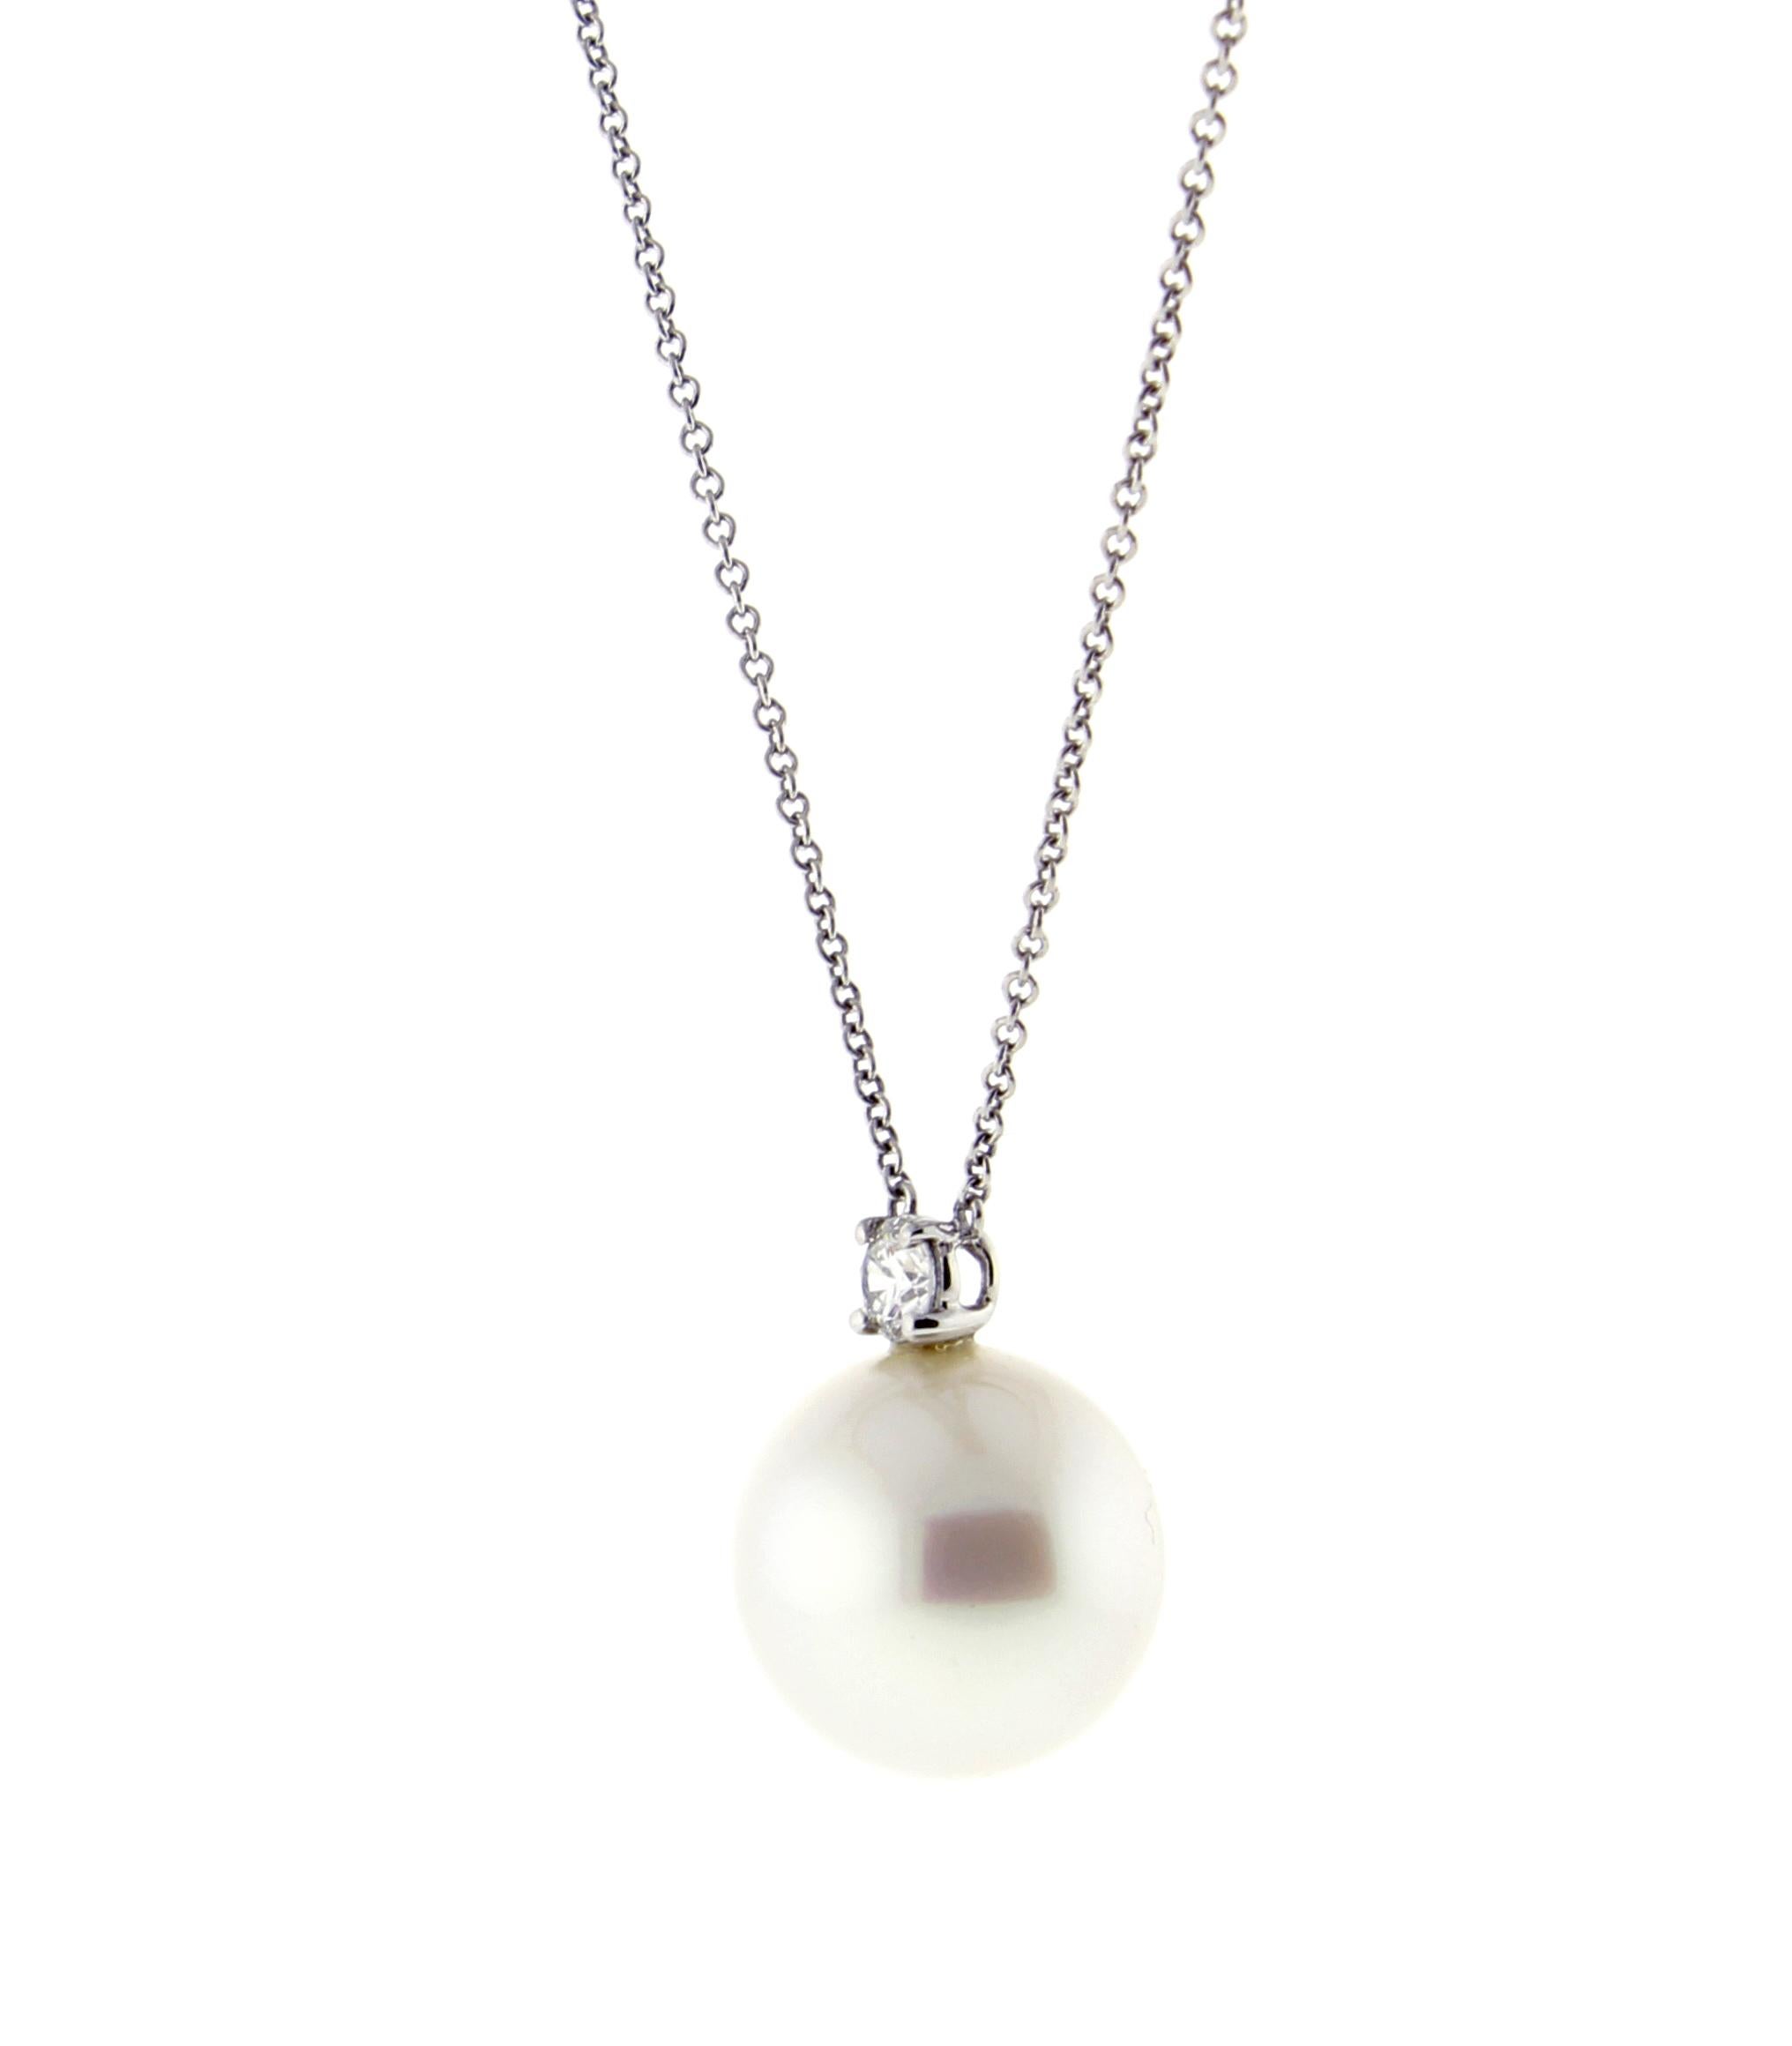 From Tiffany & Co., a south sea pearl and diamond platinum pendant.
♦ Designer: Tiffany & Co.
♦ Metal: Platinum
♦ South Sea peal = 13 X12.5mm
♦ Diamond-.17 carats
♦ Circa 2000
♦ Size 16 inch  Tiffany chain
♦ Packaging: Tiffany box and poach 
♦